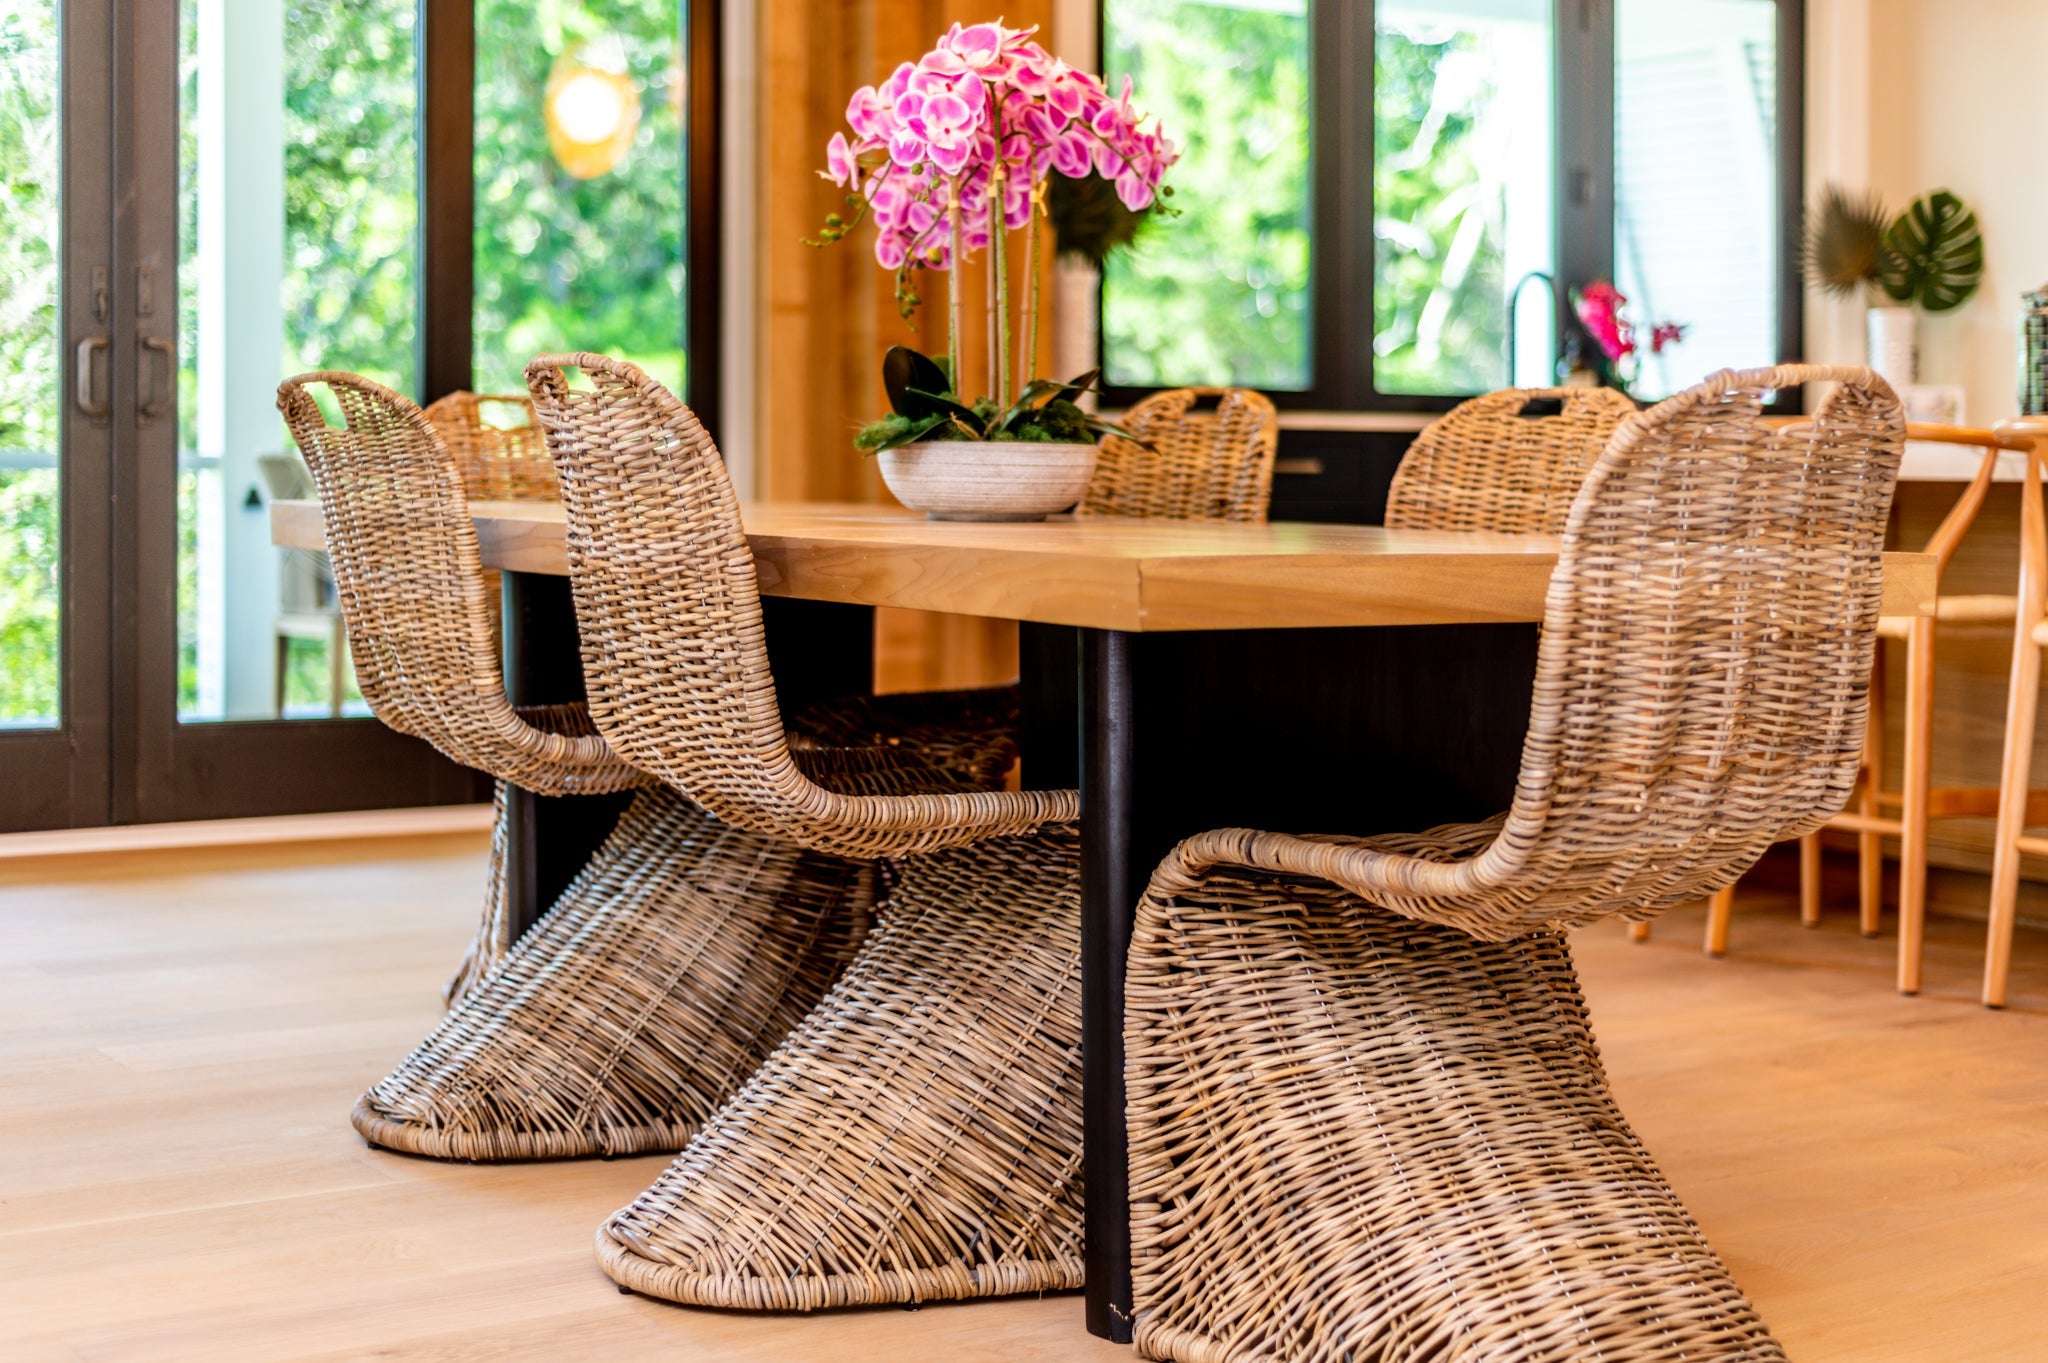 The Beaufort Hand-Woven Rattan and Metal Chair